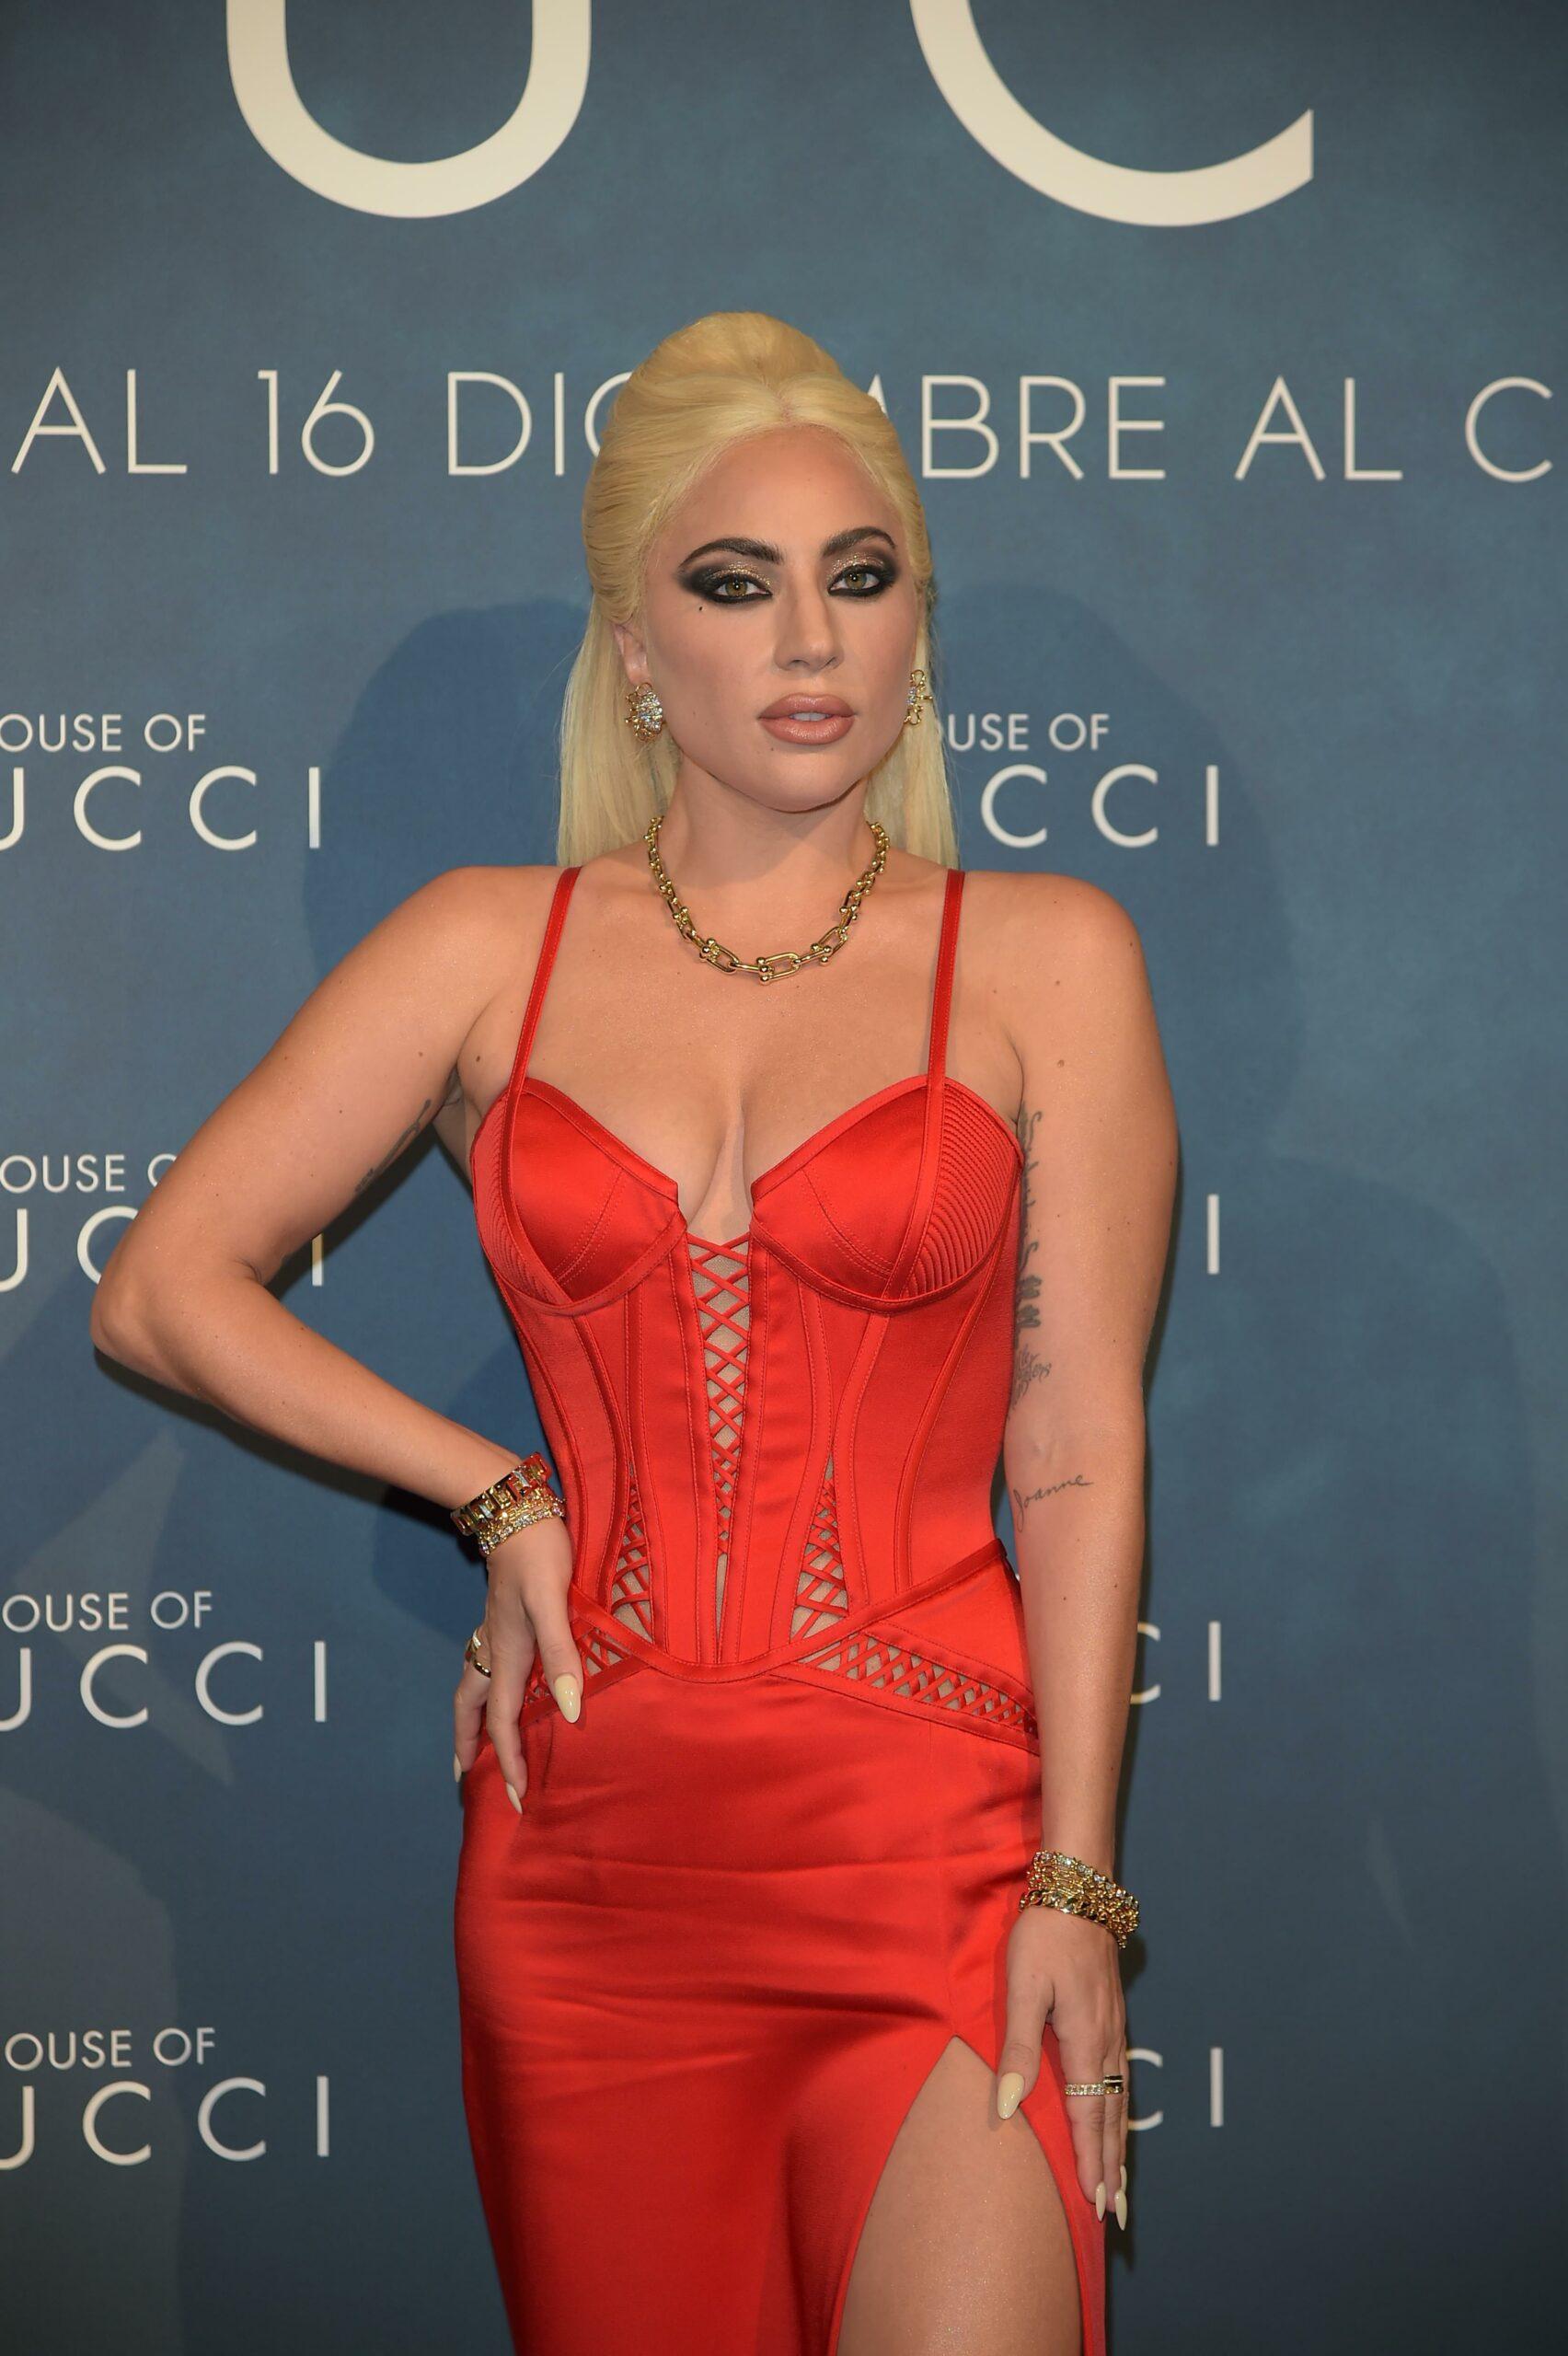 Lady Gaga attends the premeire of "House of Gucci" in Milan